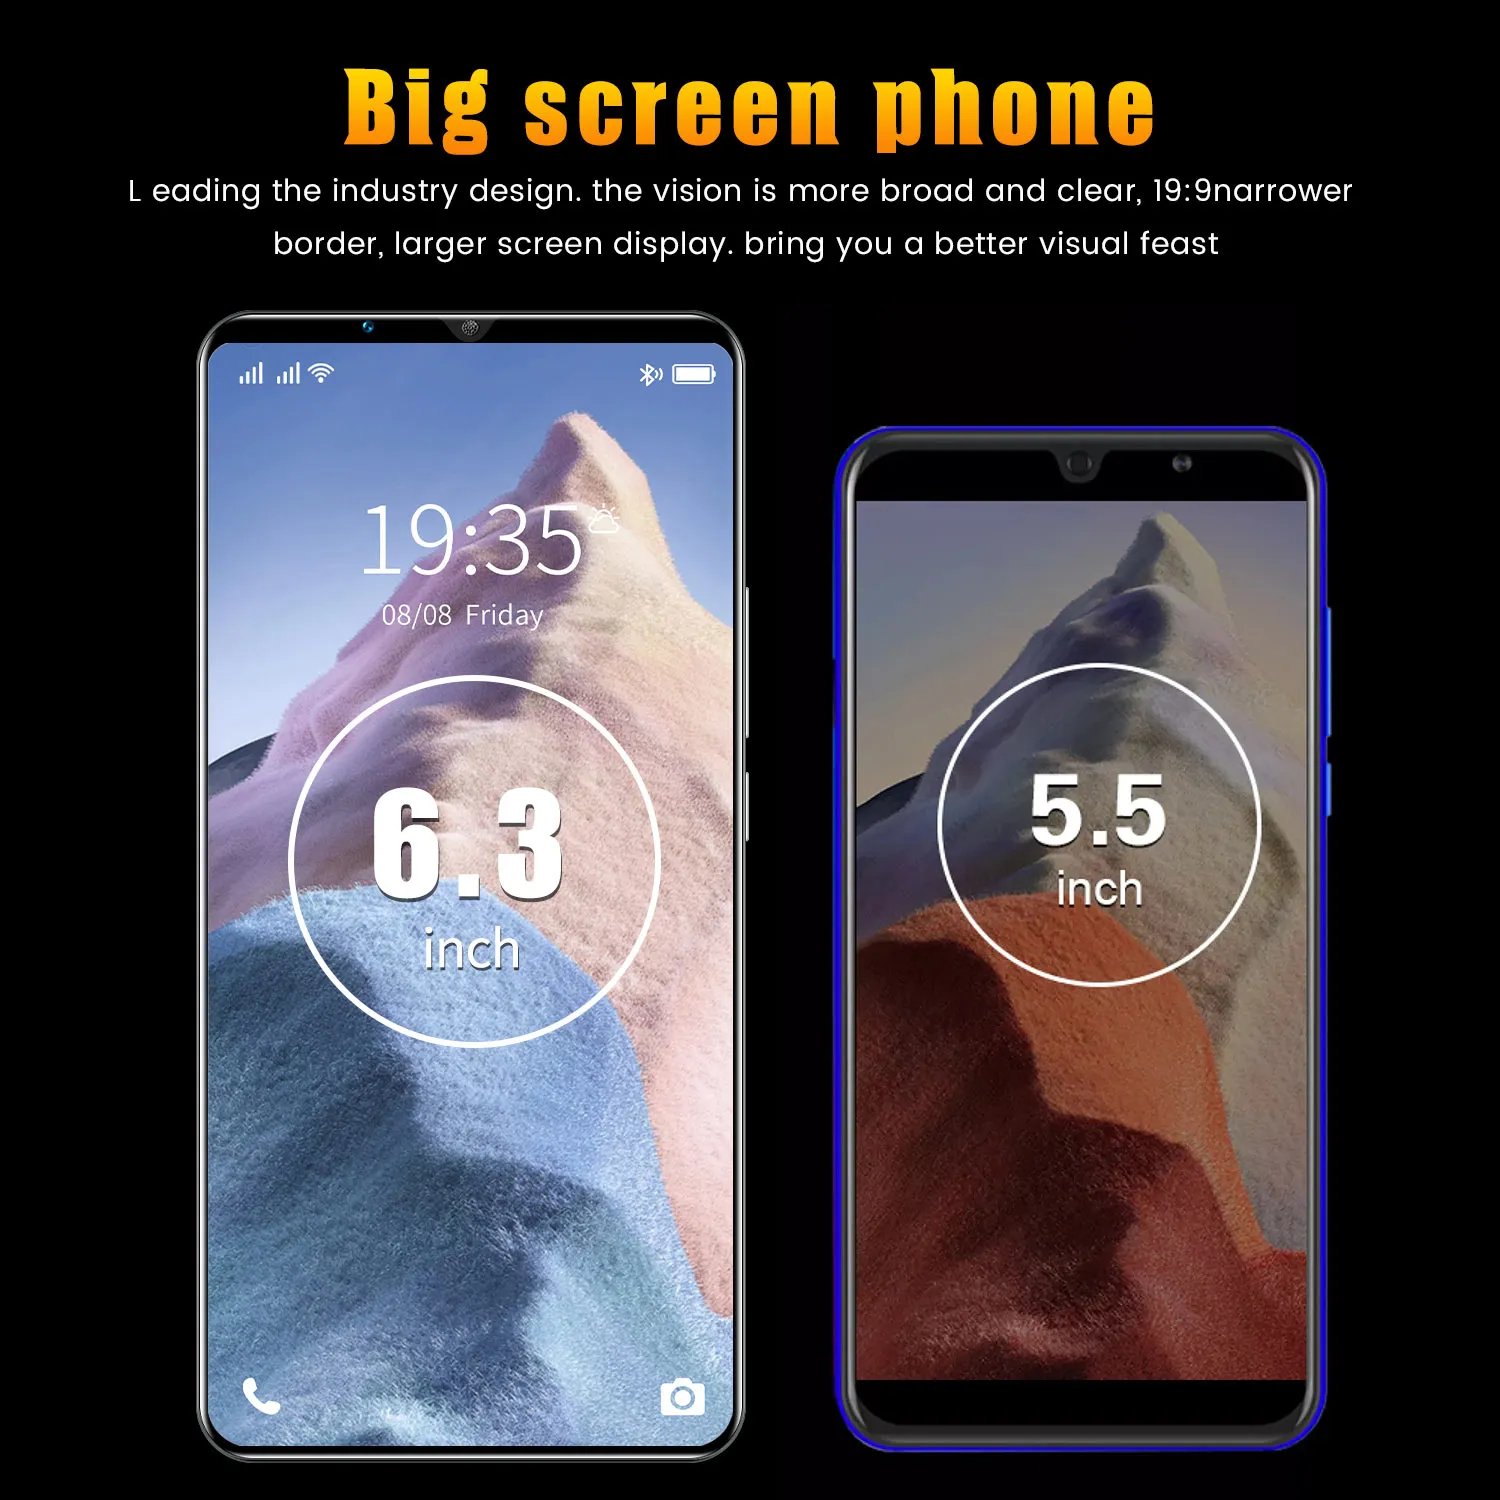 Cheapest Powerful Smart Phone M11 Ultra 6.3 Inch 16GB RAM 768GB ROM Dual Sim Unlocked Smartphone Android 10.0 4G/5G Mobile Phone